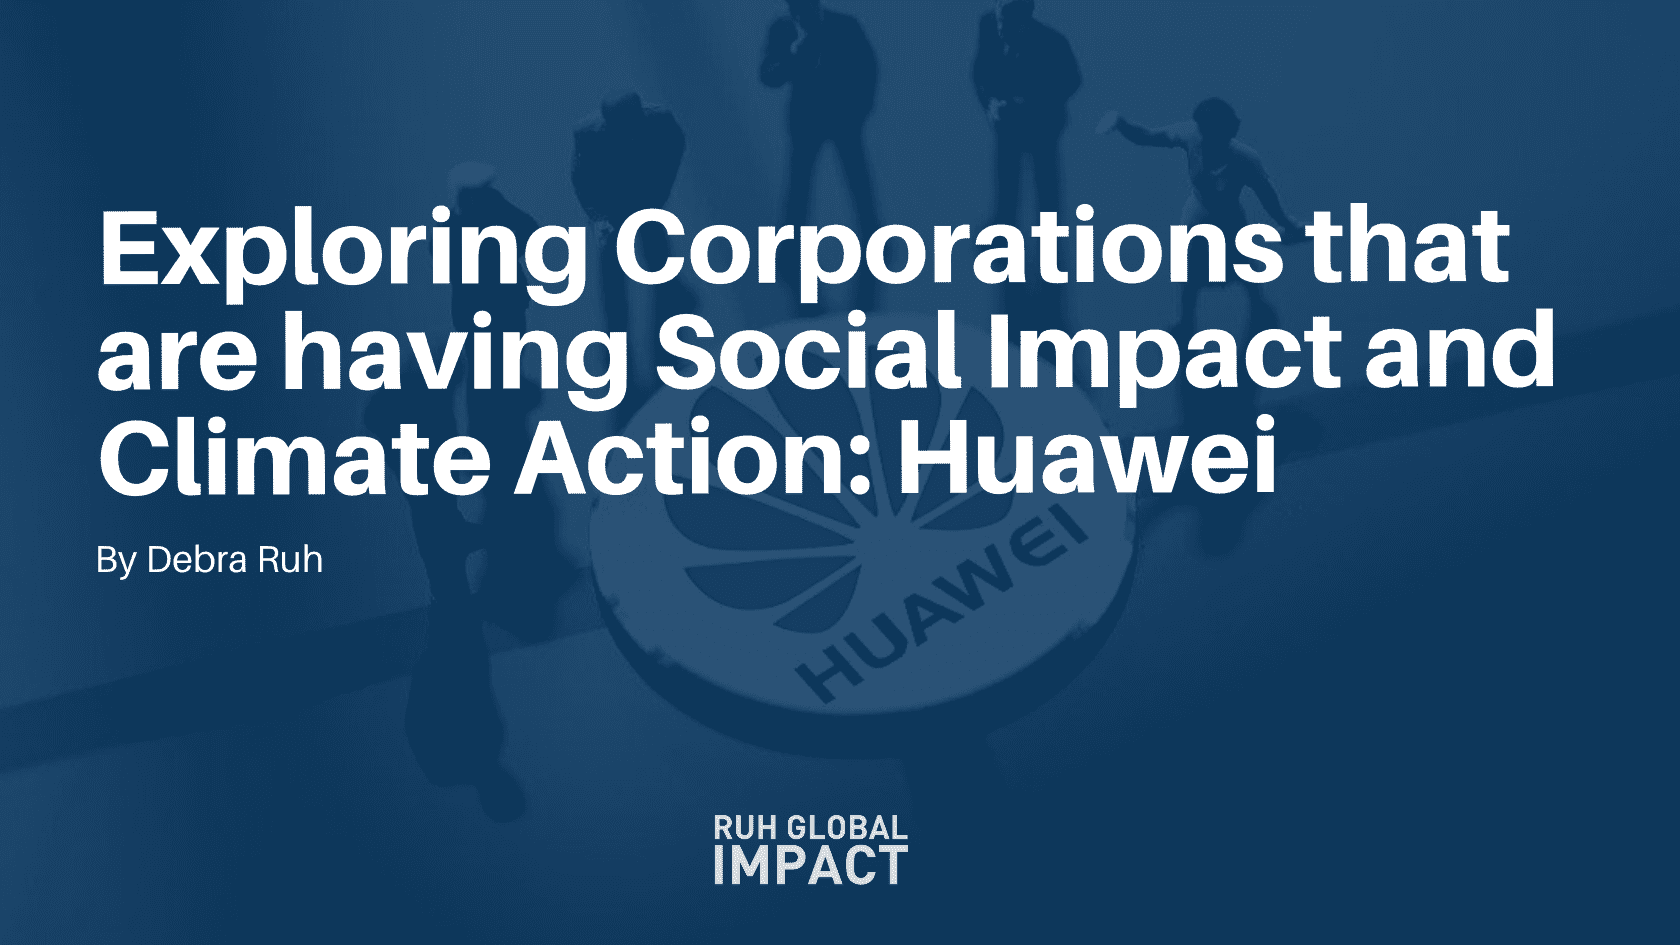 Exploring Corporations that are having Social Impact and Climate Action: Huawei